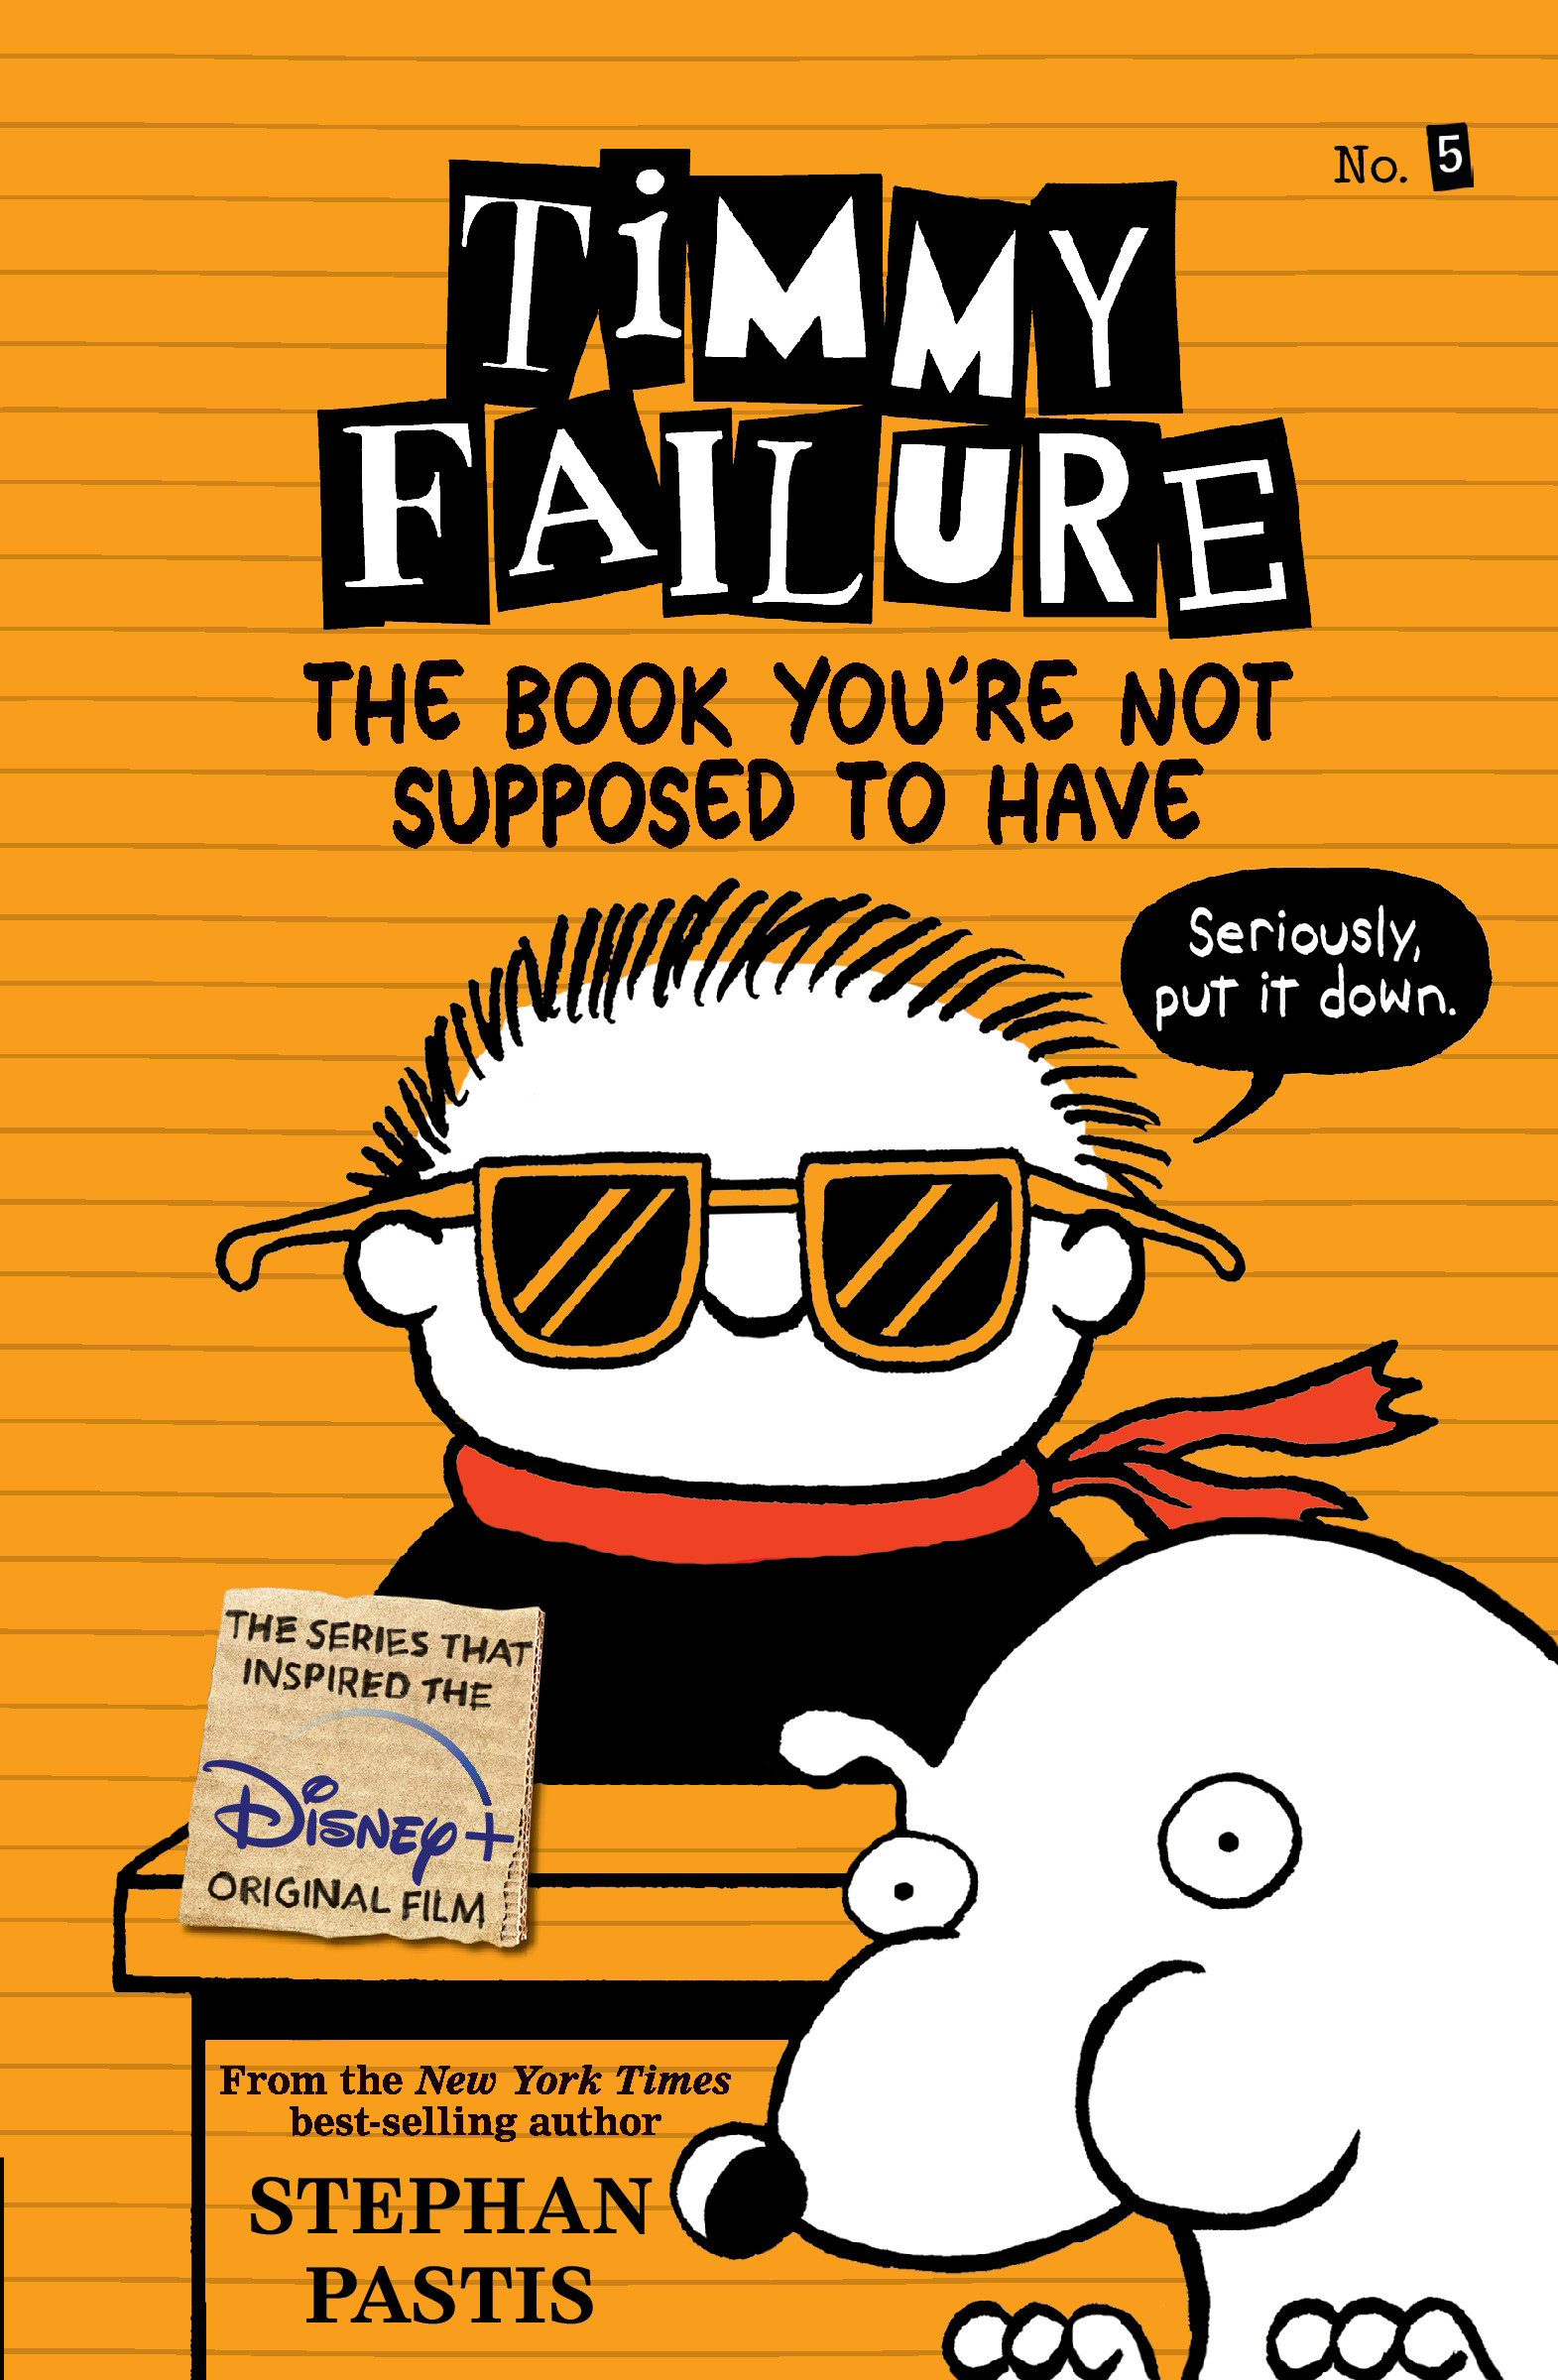 Timmy Failure The Book You're Not Supposed To Have